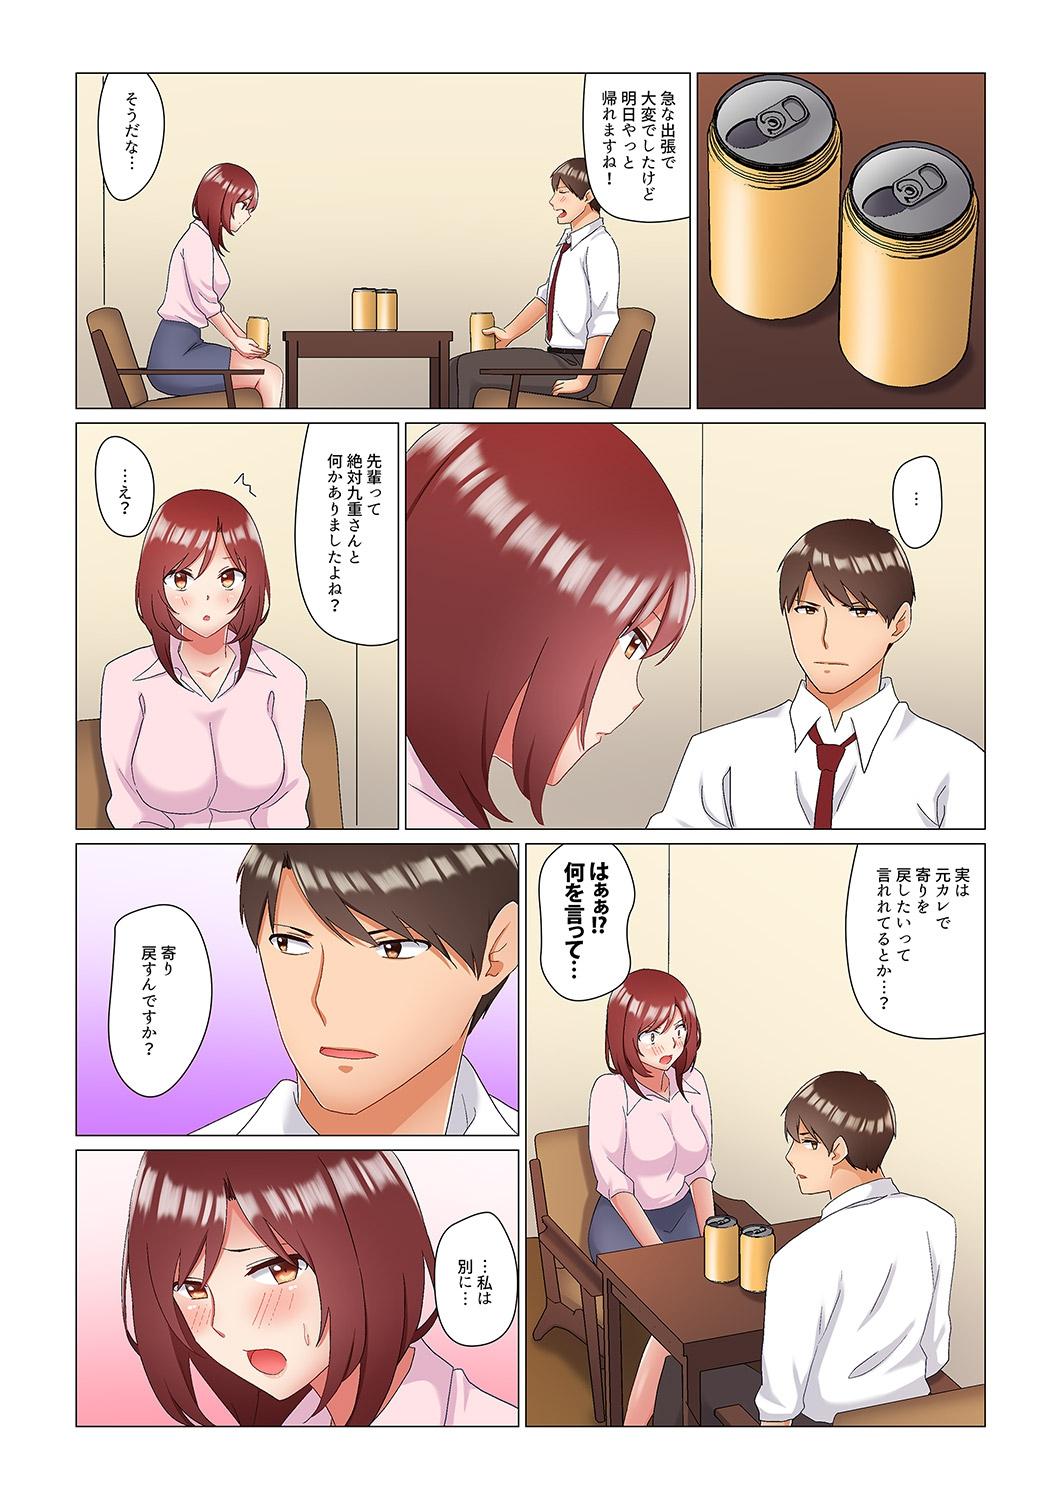 Aussie 居眠り中の女上司にこっそり挿入（※寝たフリしながらイッてました）1-10 Pick Up - Page 249